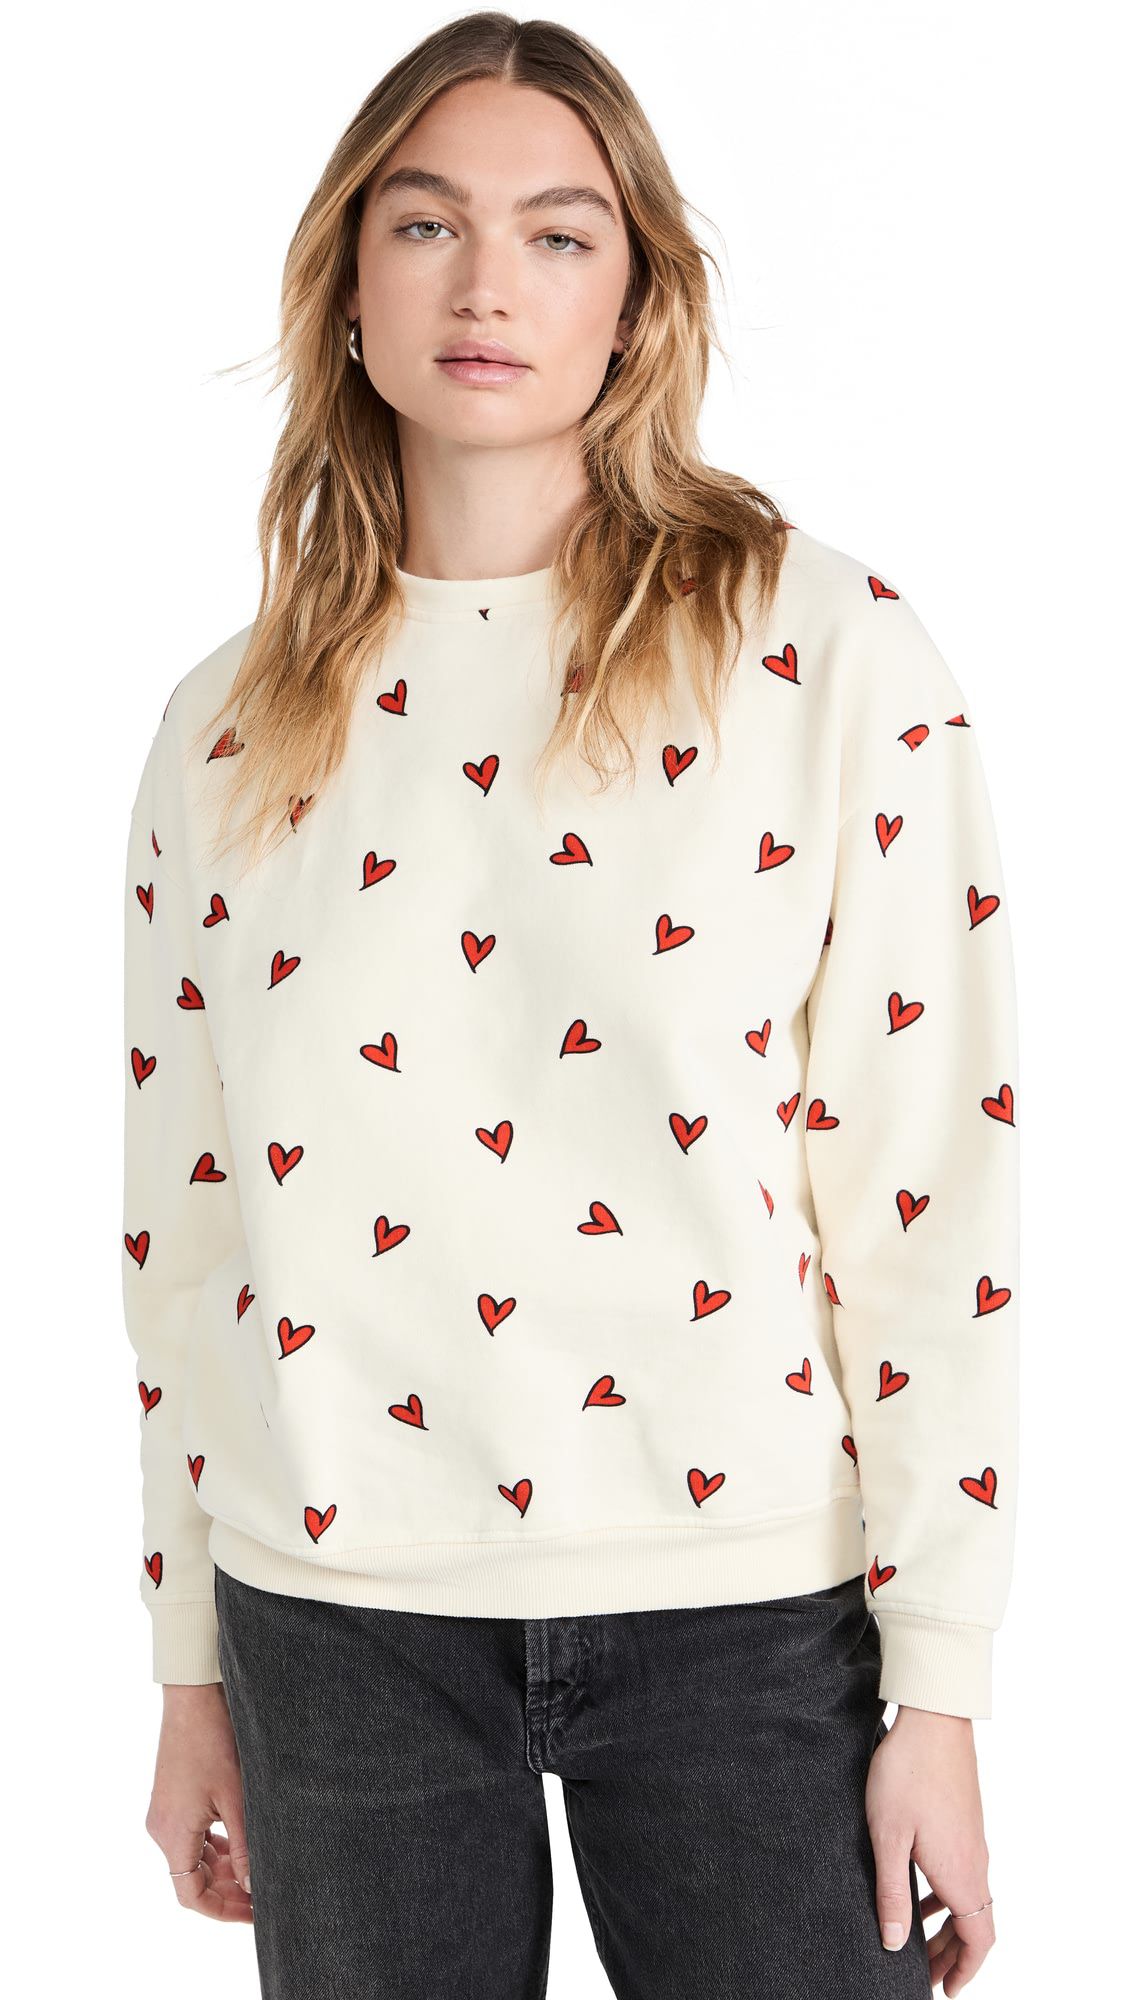 Made in china Heart pattern high molala casual hoodie top